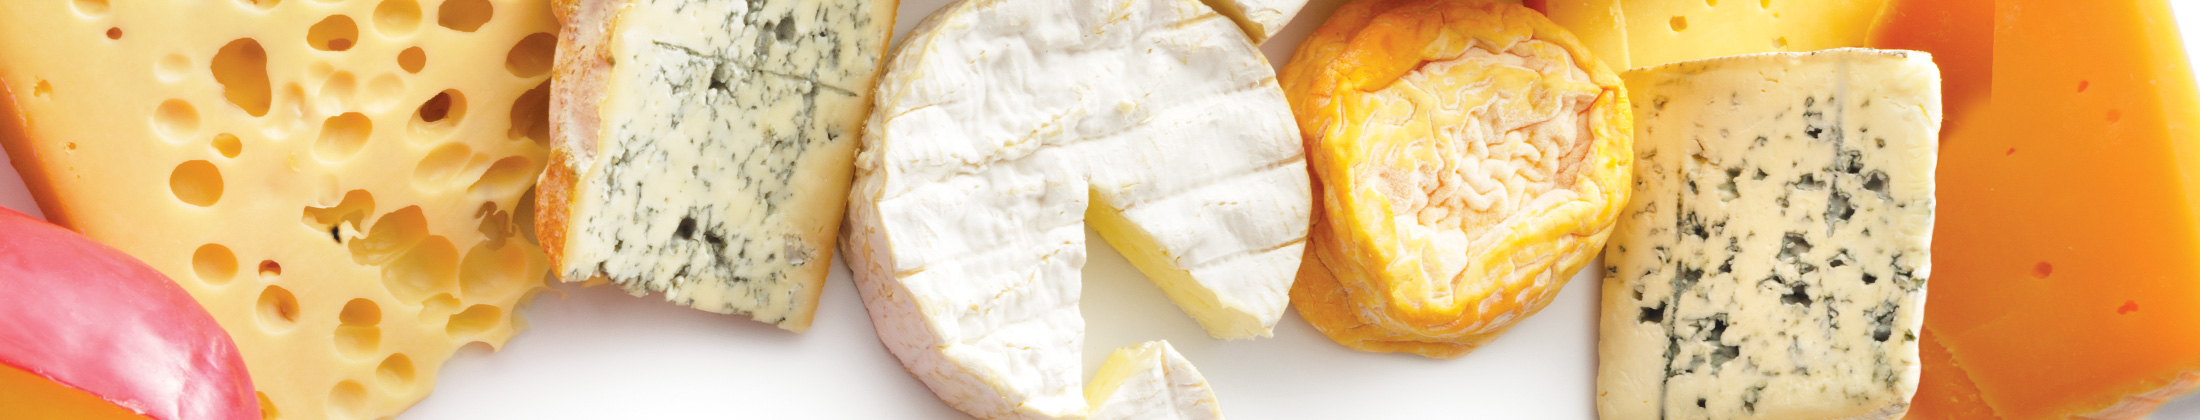 various types of cheeses across a plain colored background